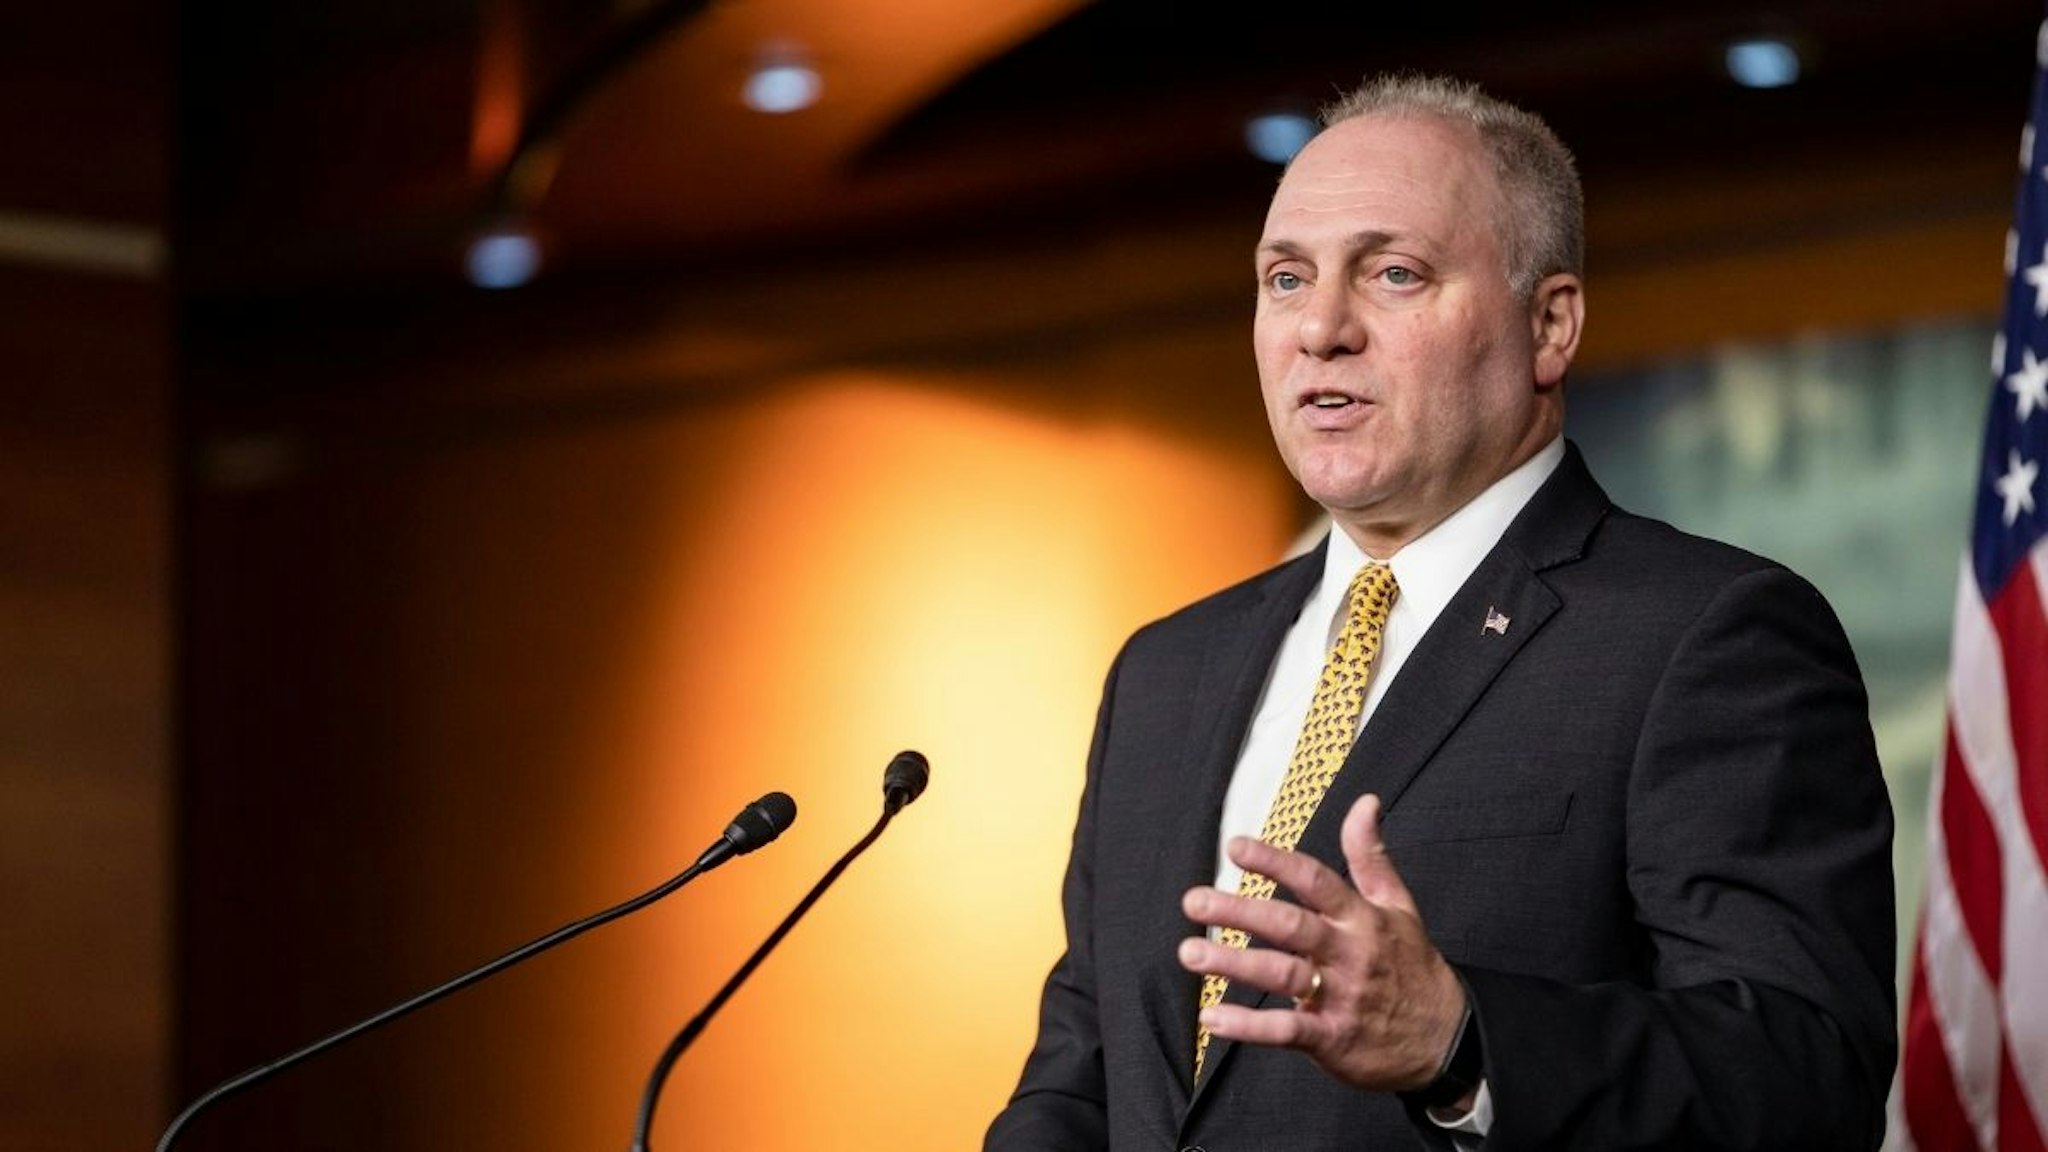 Republican Whip Rep. Steve Scalise (R-LA) speaks during a press conference at the US Capitol on December 17, 2019 in Washington, DC.